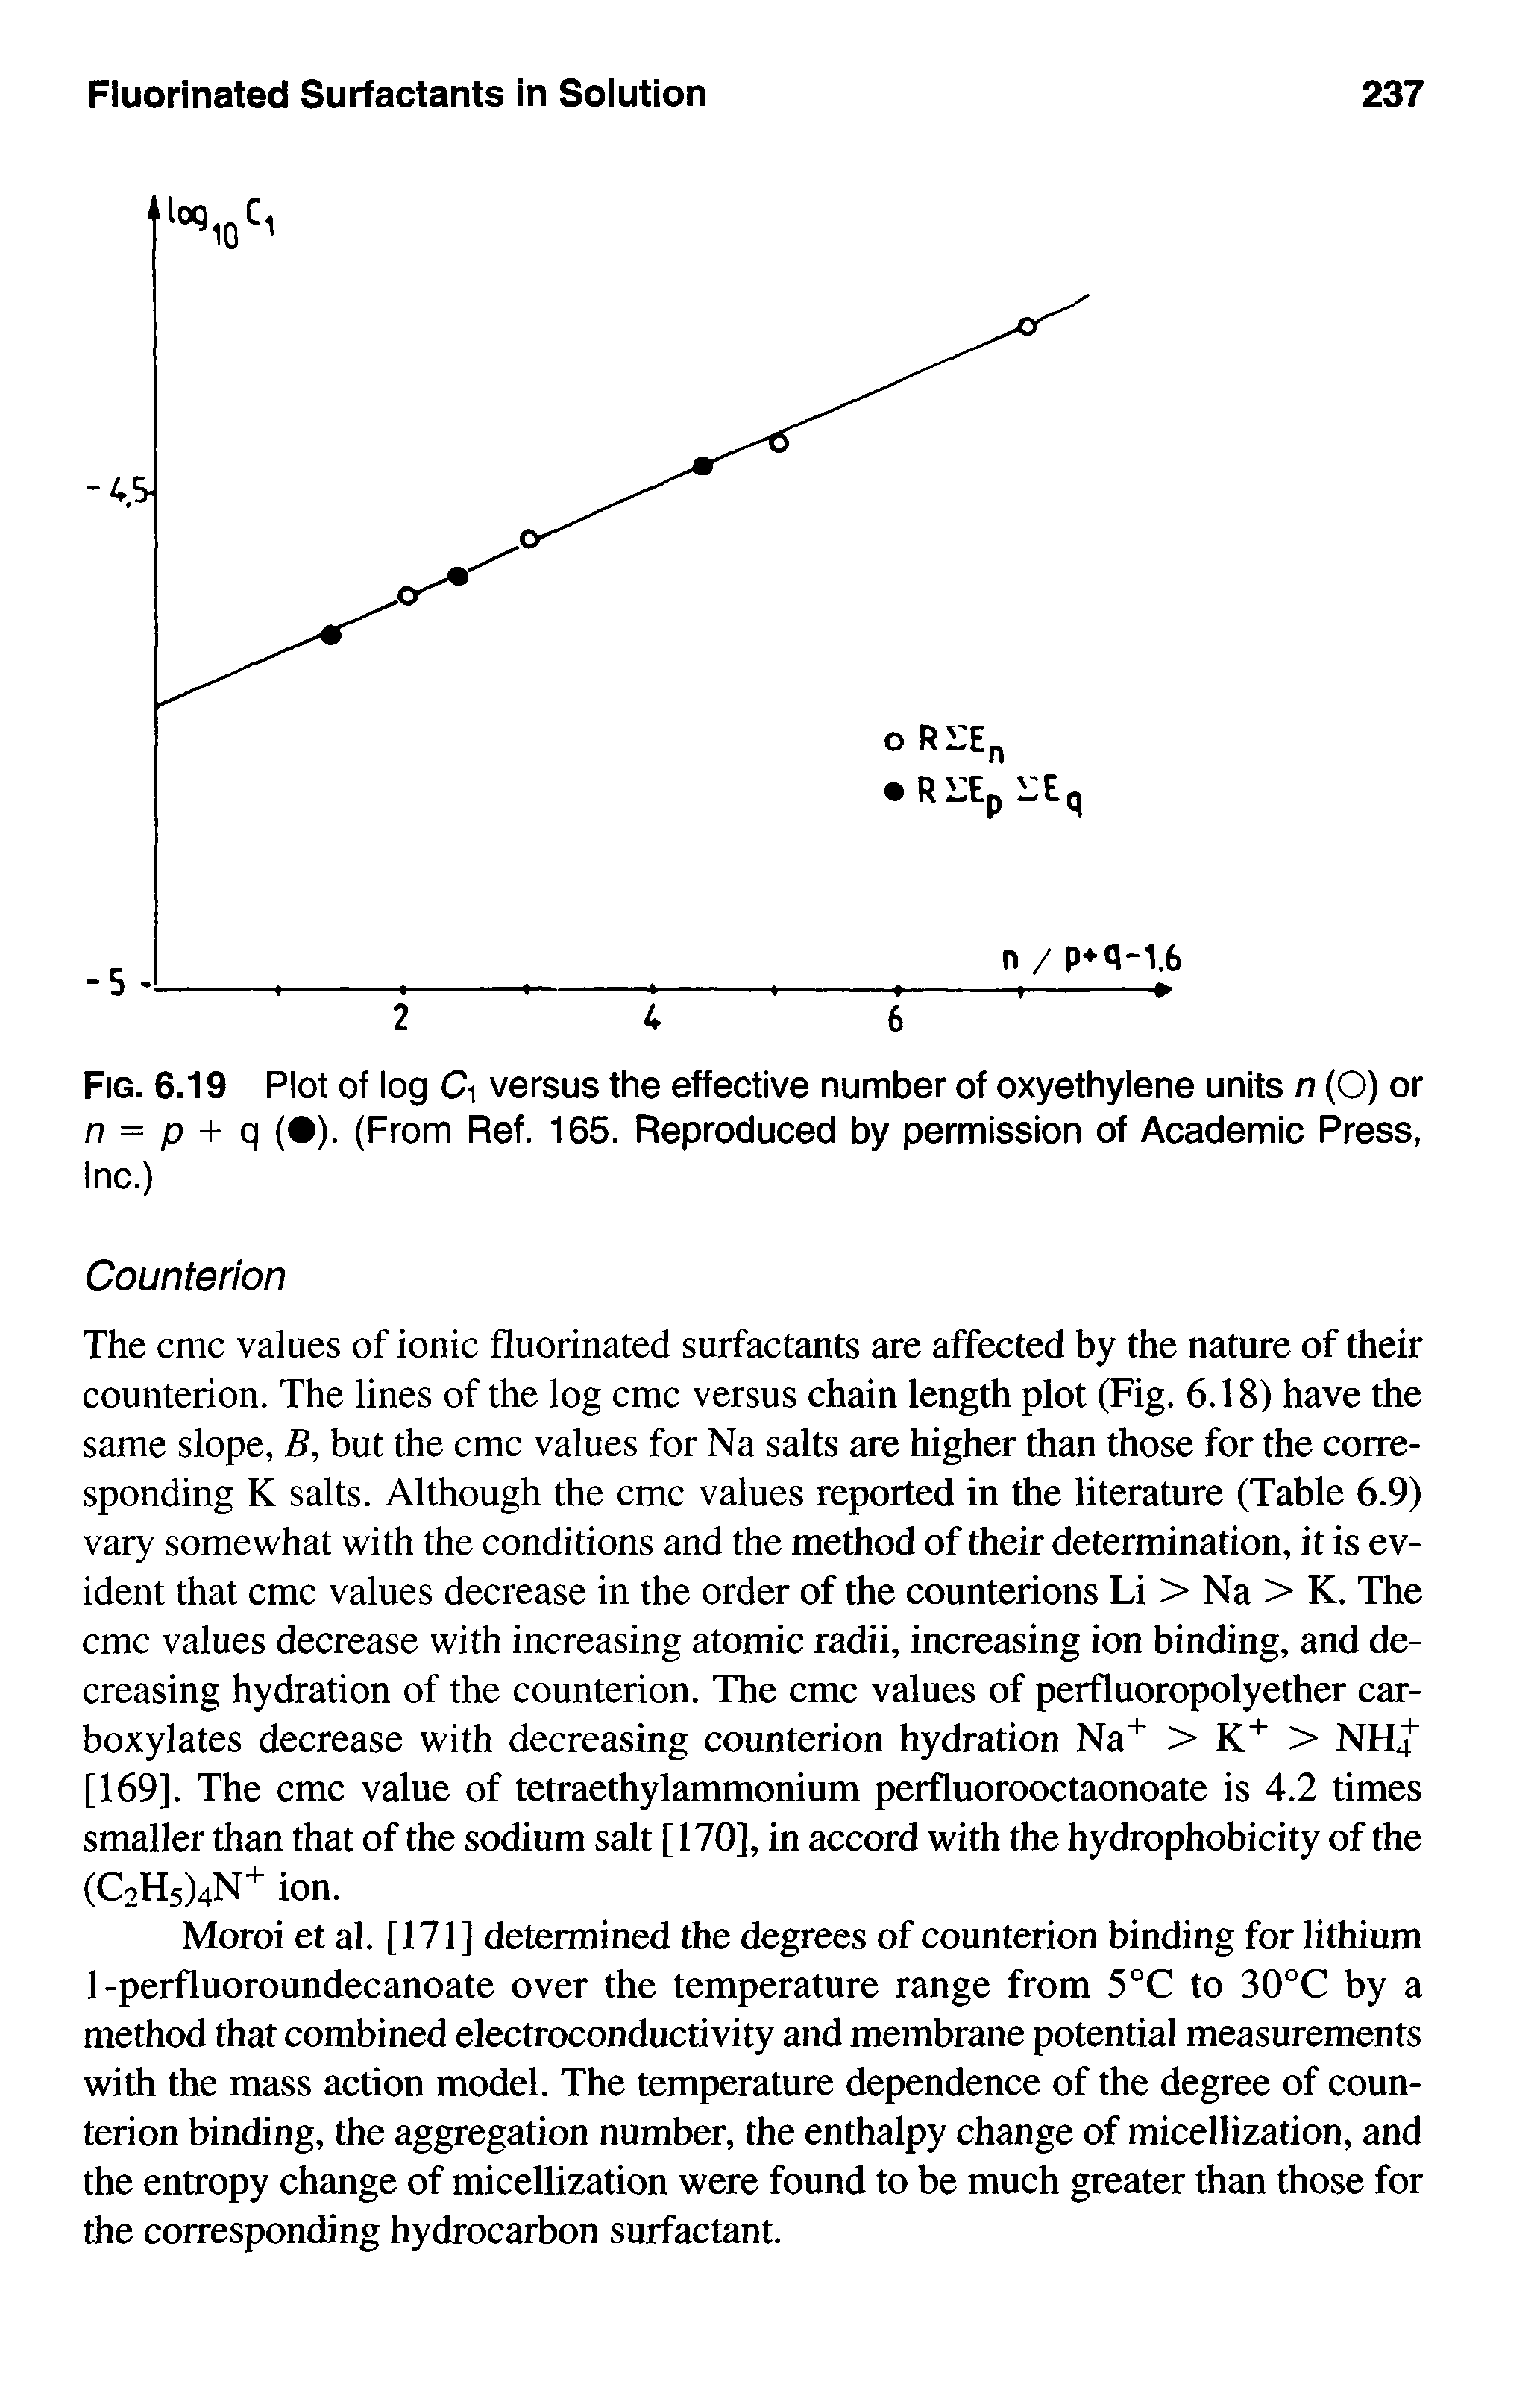 Fig. 6.19 Plot of log C versus the effective number of oxyethylene units n (O) or n = p + q ( ). (From Ref. 165. Reproduced by permission of Academic Press, Inc.)...